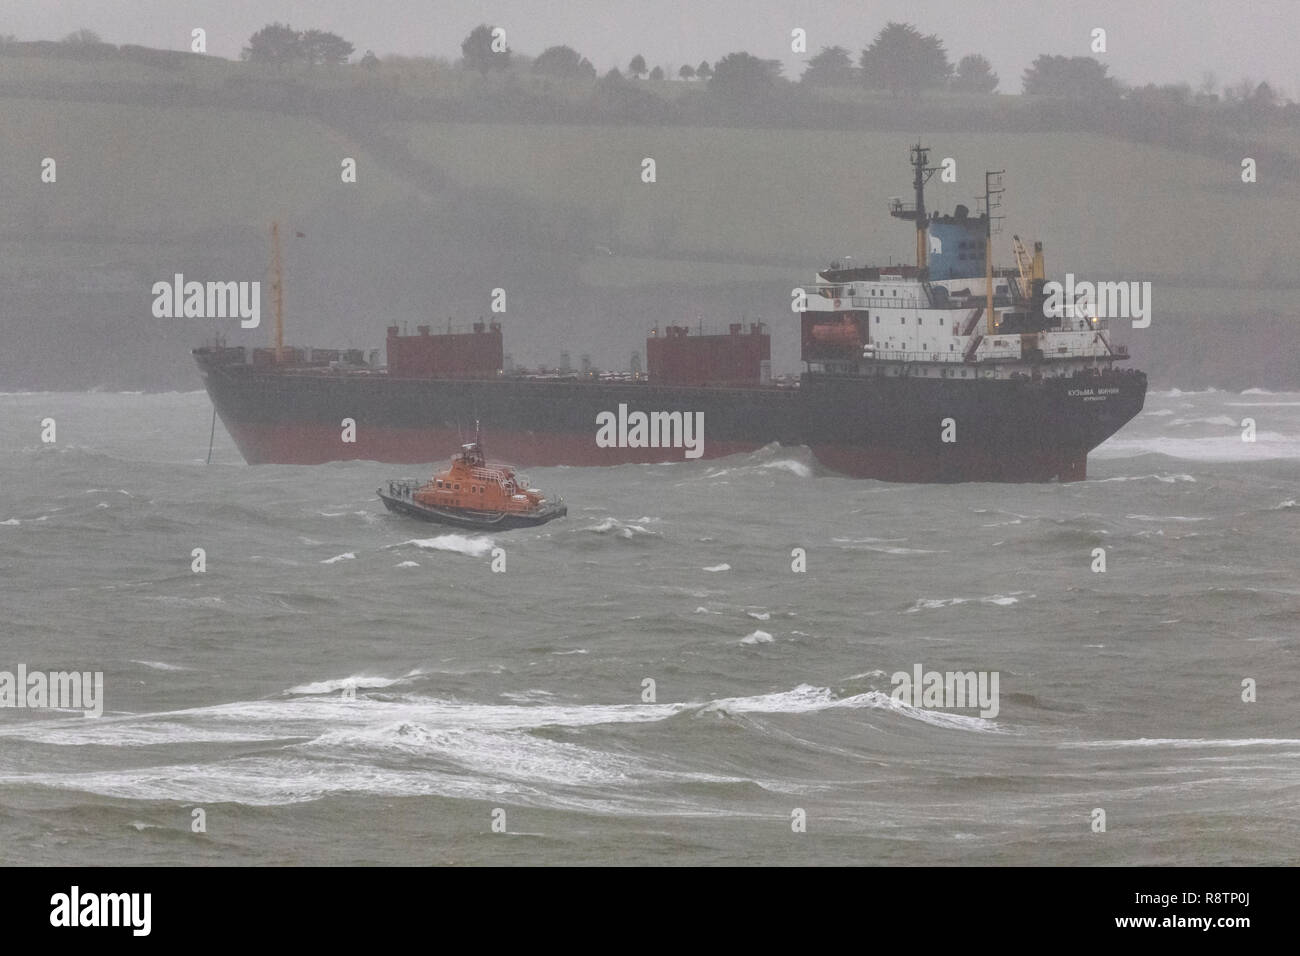 Falmouth, Cornwall, UK. 18th Dec, 2018. A rescue operation is under way after a 16,000-tonne Russian cargo ship the Kuzma Minin ran aground off Gyngvase beach in Cornwall in the early hours of the morning of Tuesday 18th December . The coastguard believes that strong gale force winds overnight caused the ship to drag its anchor and become stranded on the beach despite all te efforts of the crew. Locals have been warned to keep off the beach as rescuers attempt to re-float the vessel. Credit: Roger Hollingsworth/Alamy Live News Stock Photo